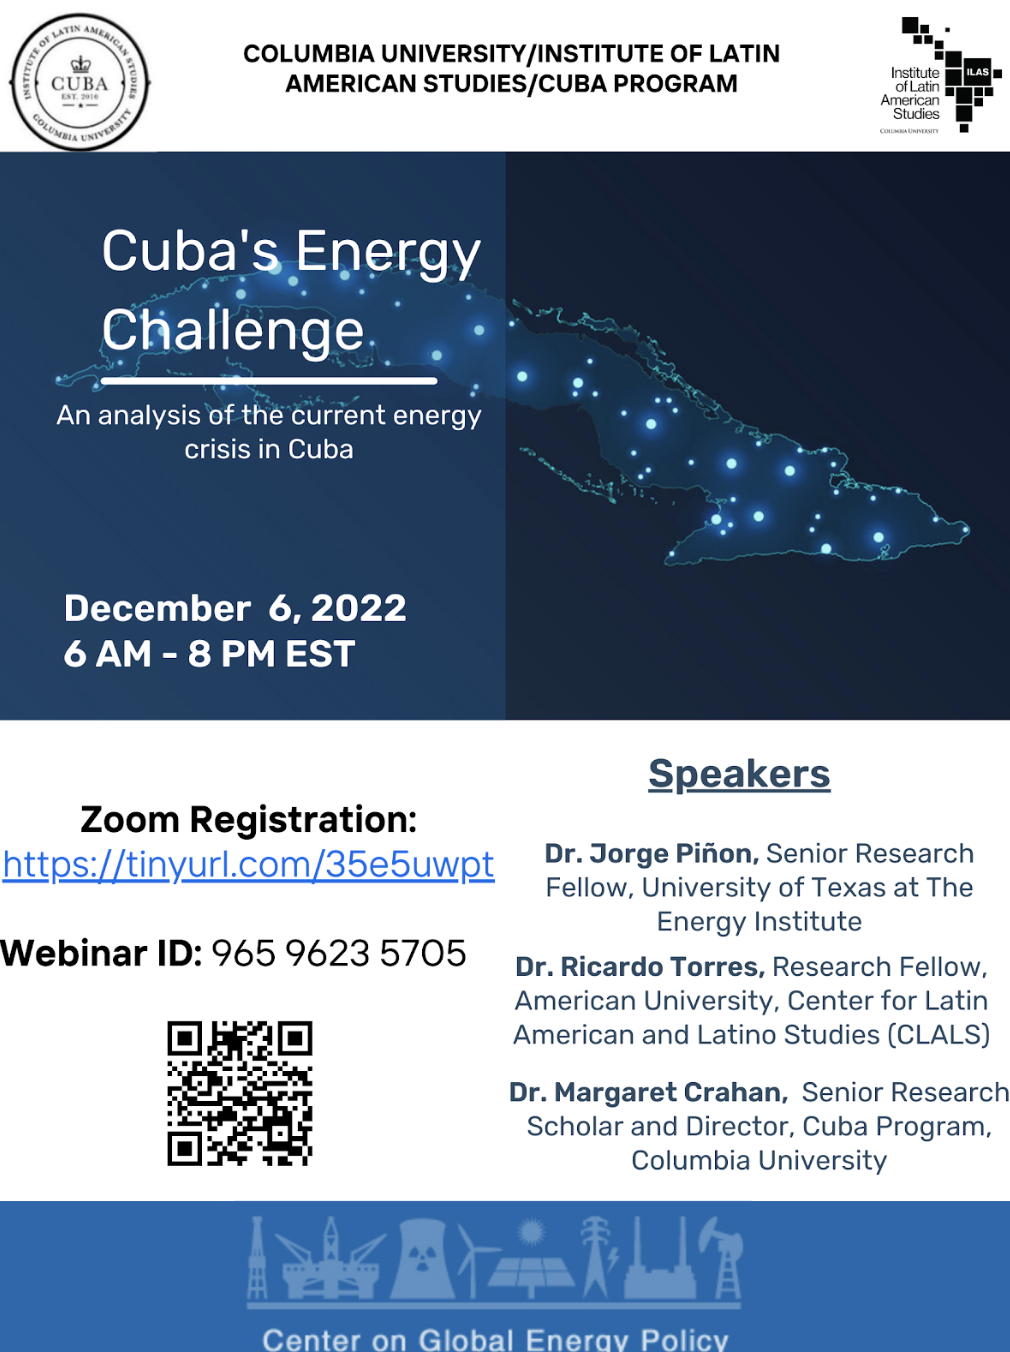 Event details on top of image of cuba with lights